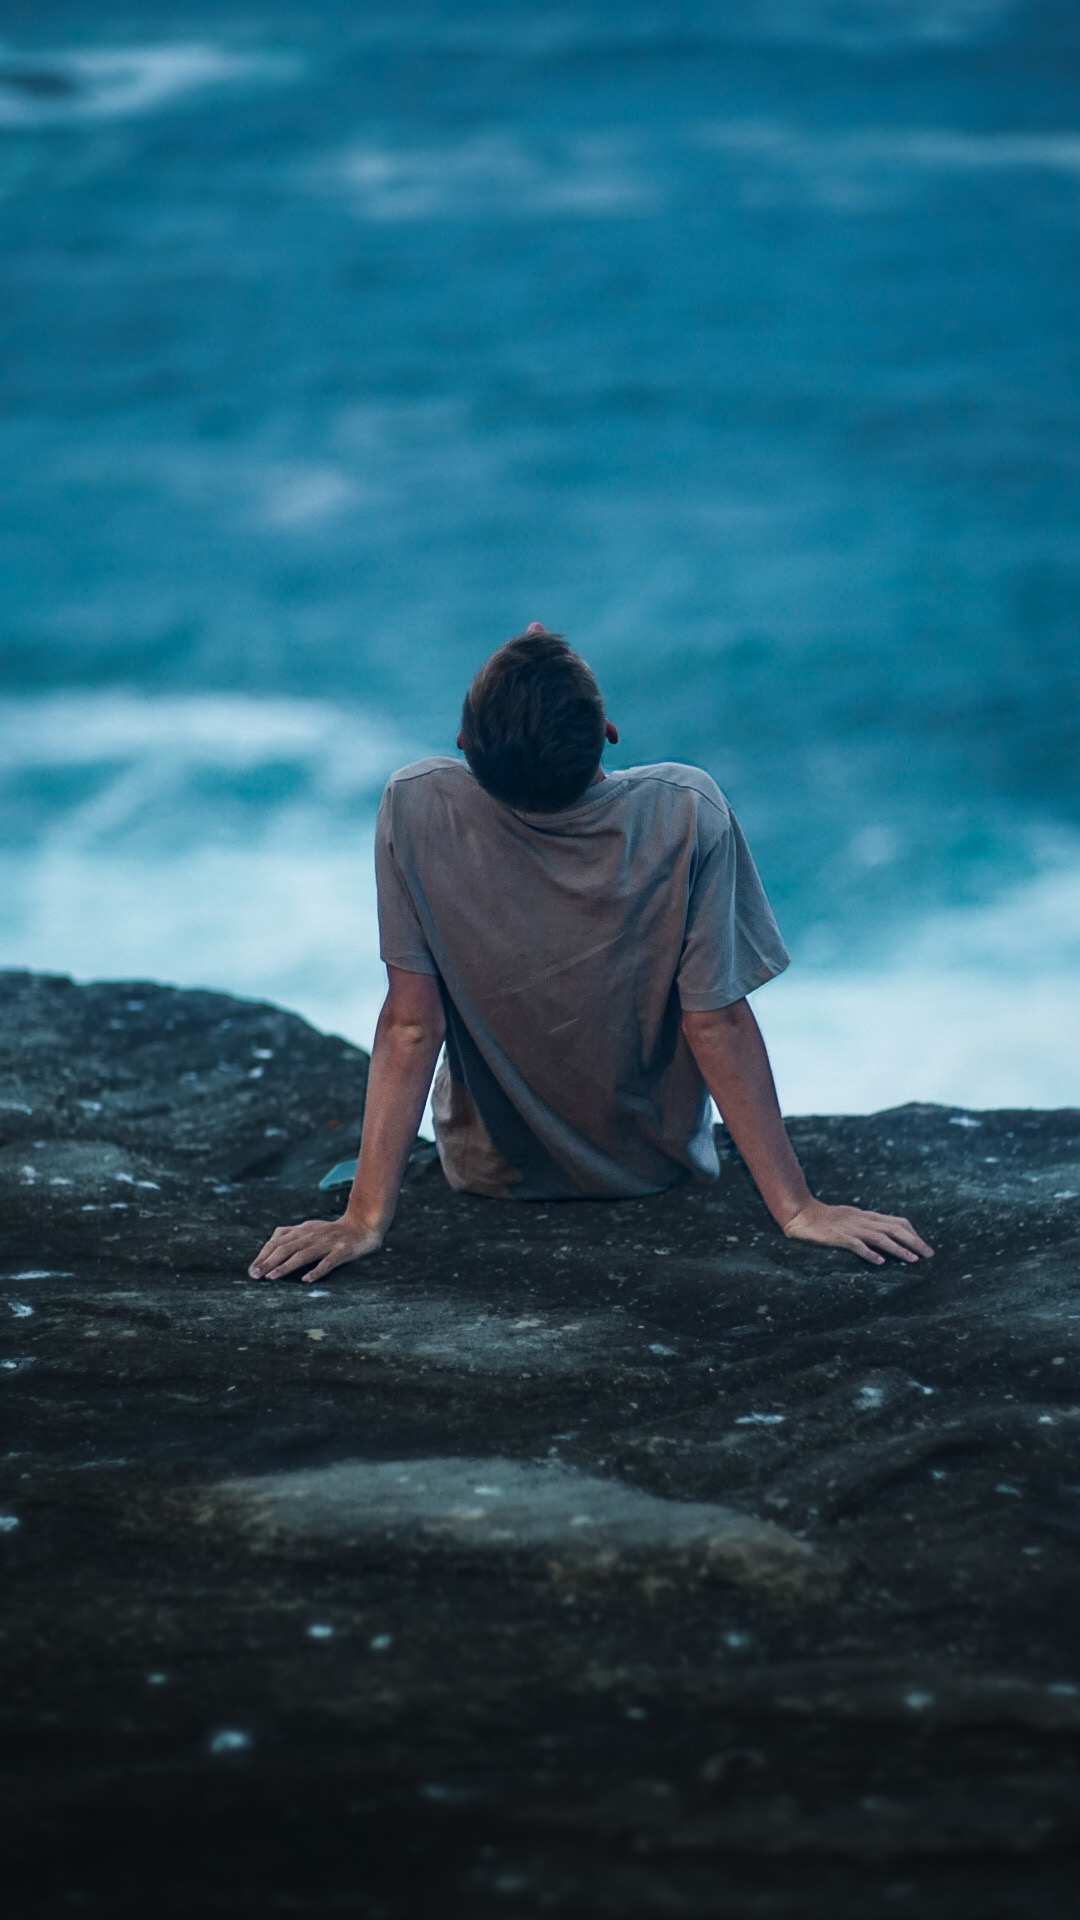 A person sitting on a cliff each leaning back, with the ocean in the background.